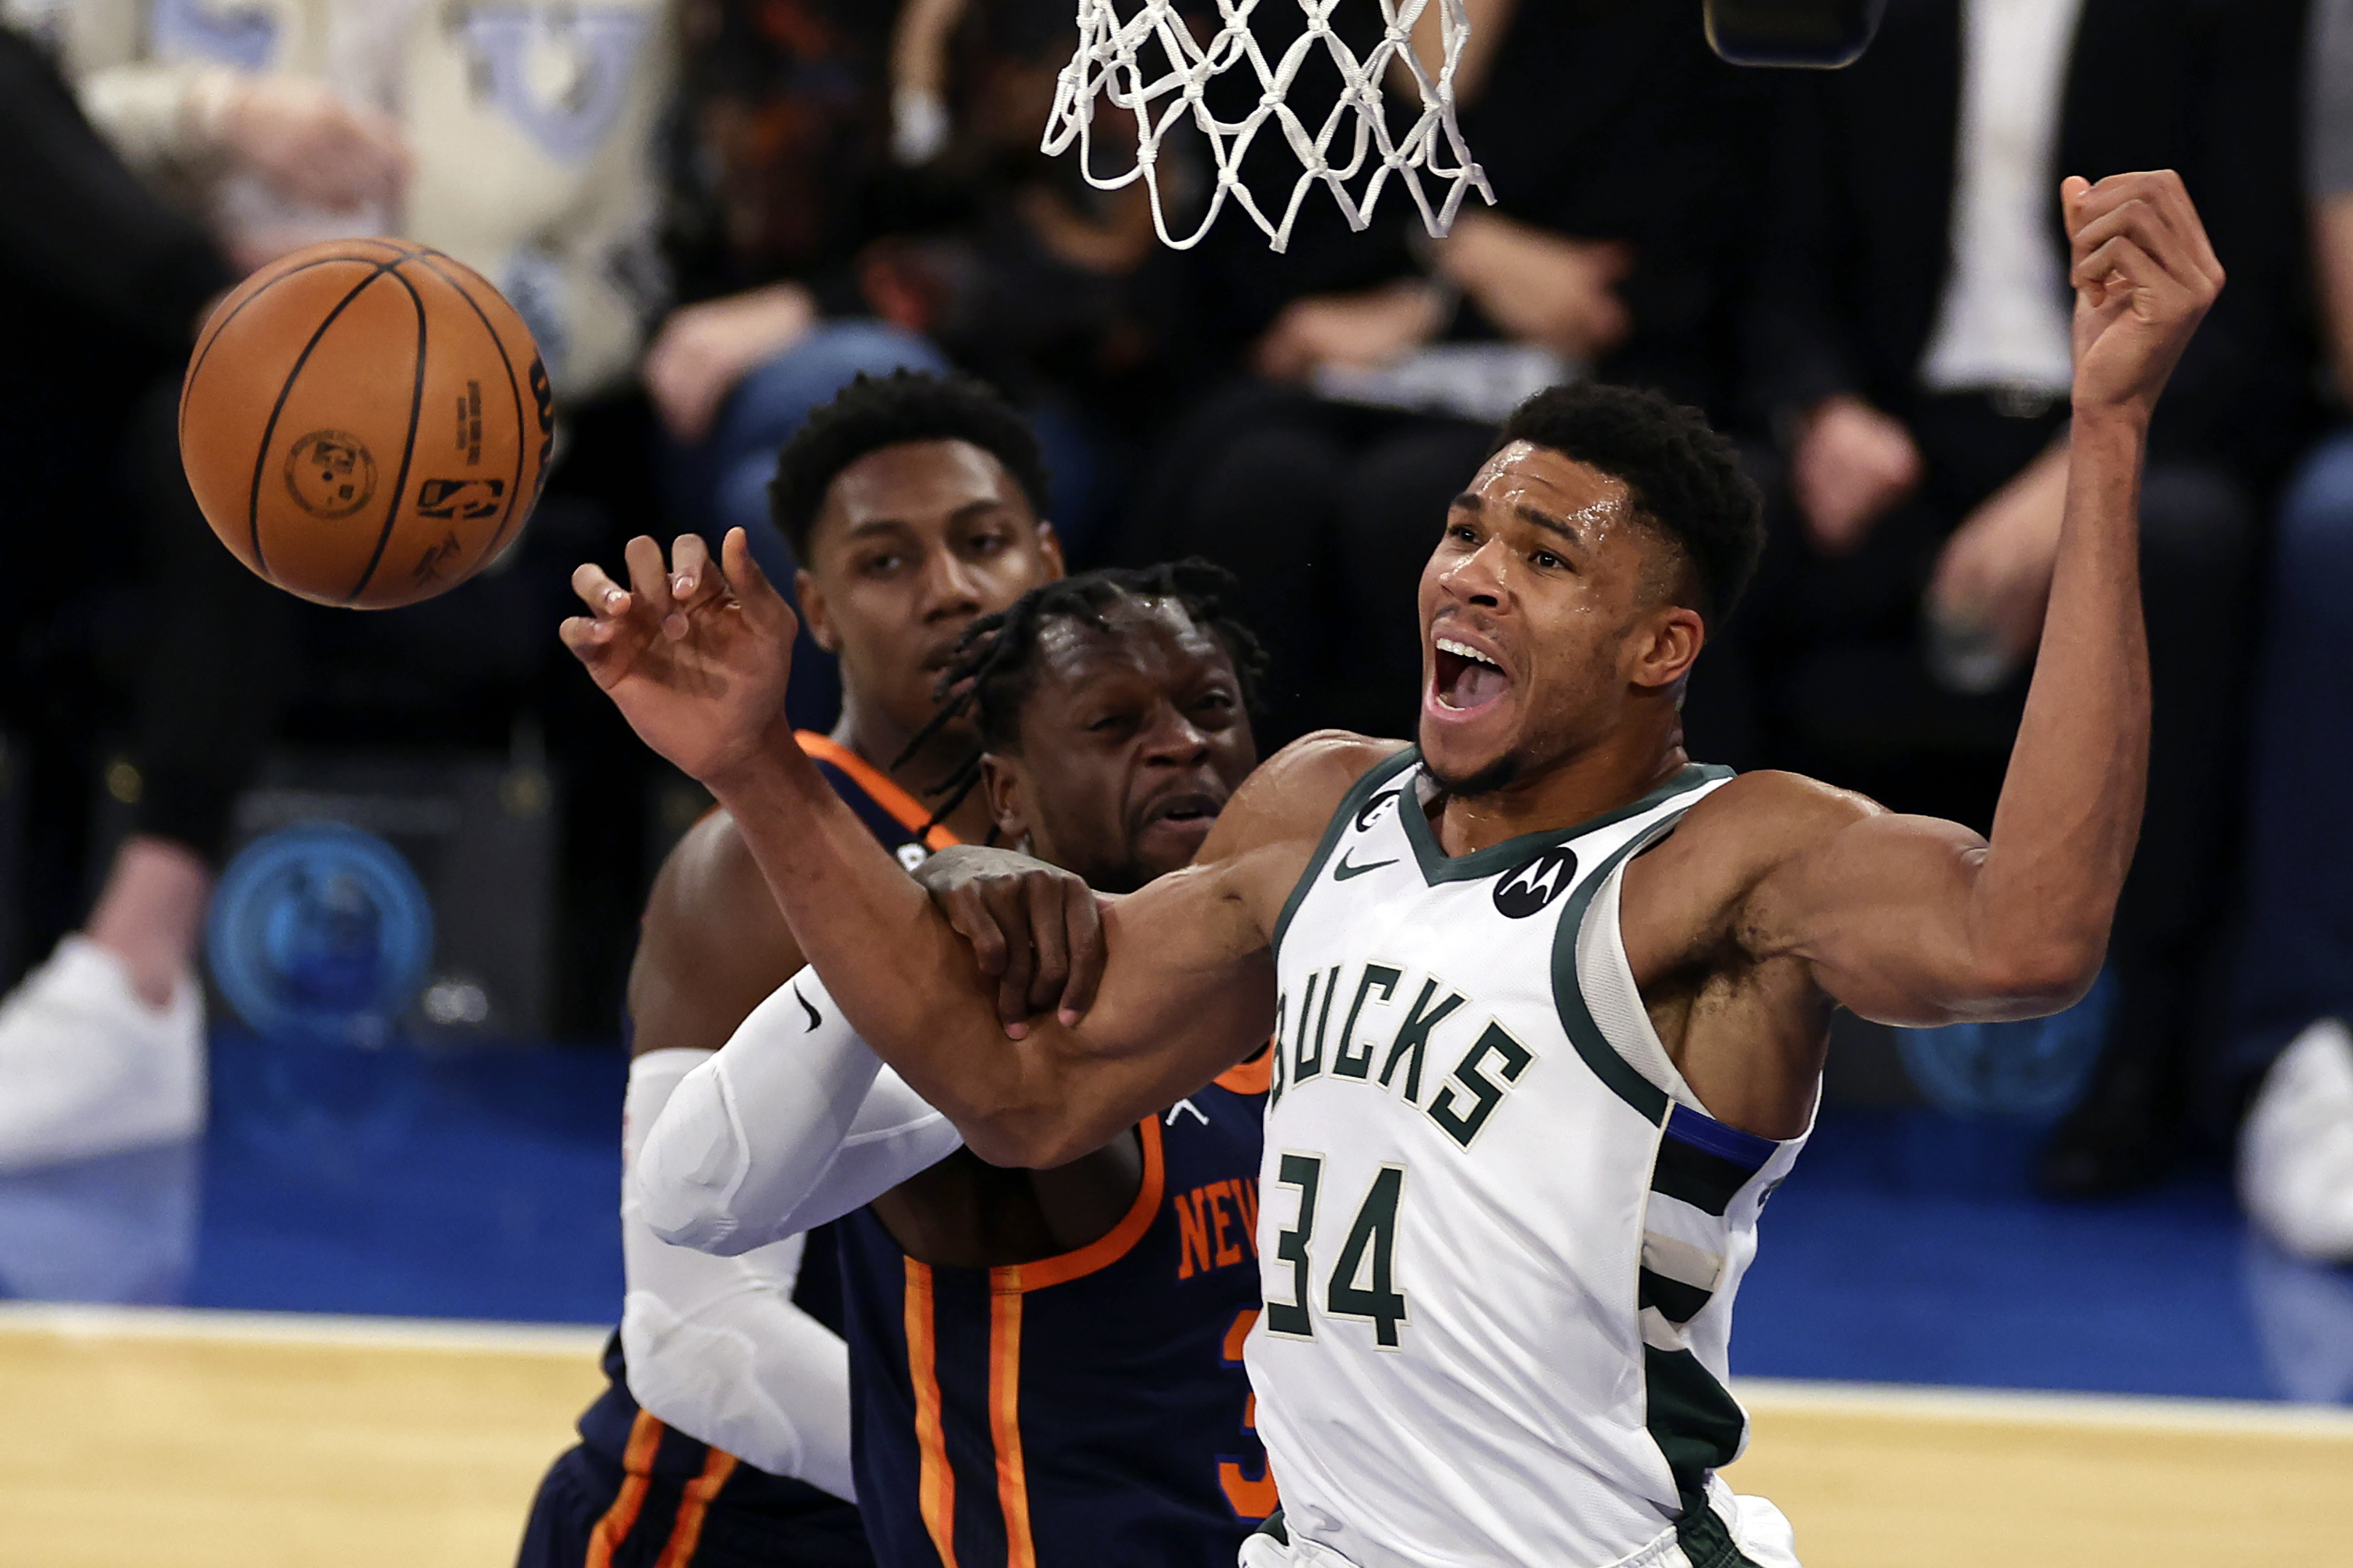 What's special about Giannis Antetokounmpo's jersey number 34? - Hindustan  Times